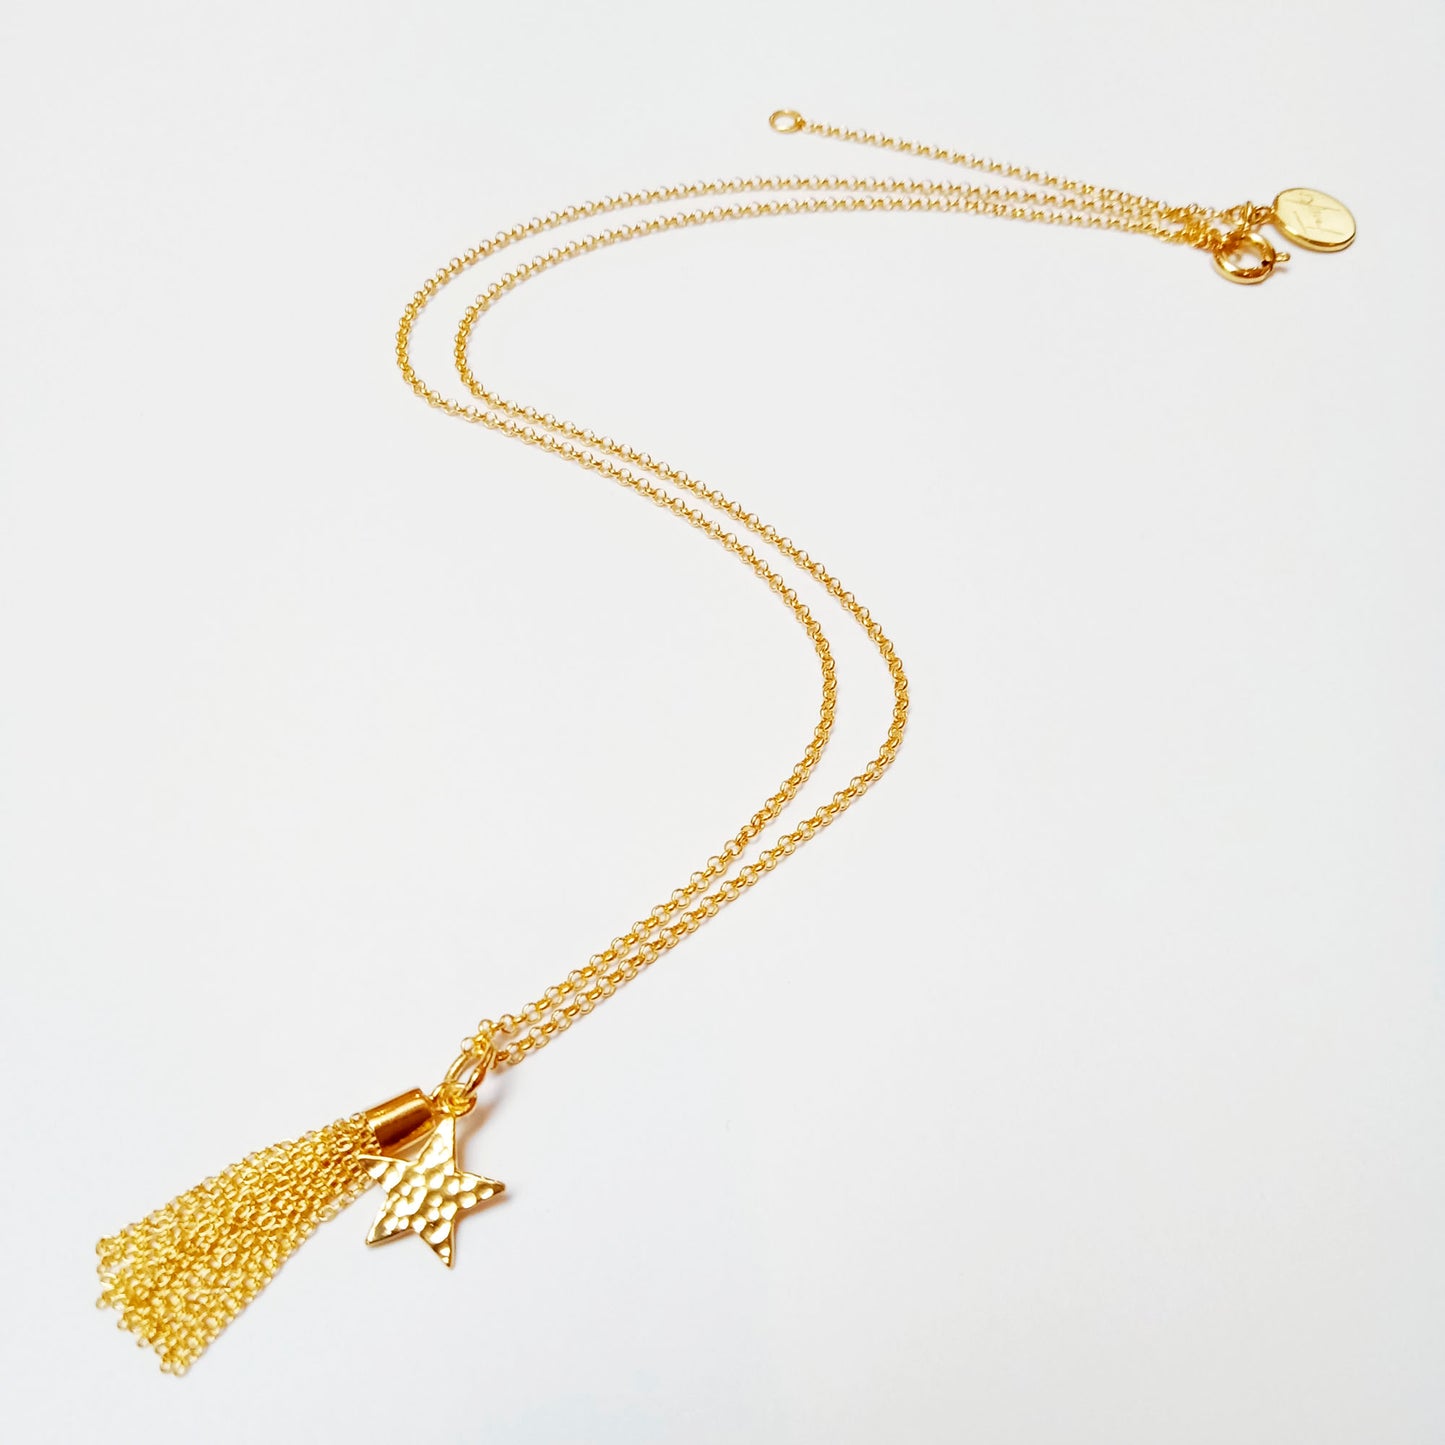 Shooting Star Tassle Necklace in Gold